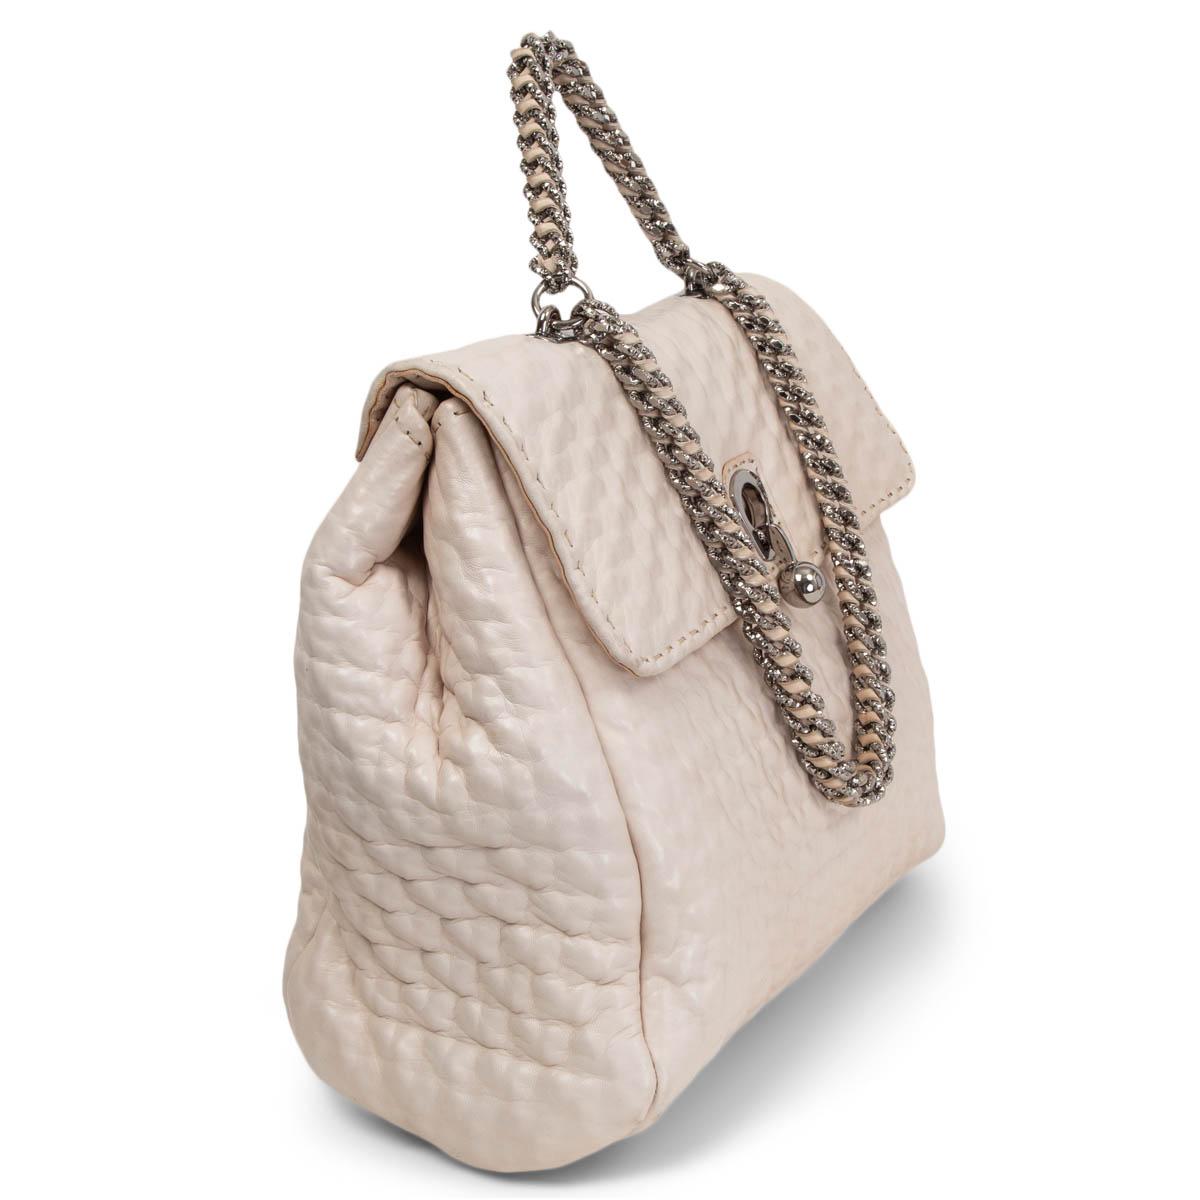 100% authentic Ermanno Scervino Faubourg Large Shoulder Bag in smooth ivory nappa leather and silver-tone metal chain weaved with leather handle and strap. Opens with a flap to a specious interior lined in black knitted wool with one big zipper